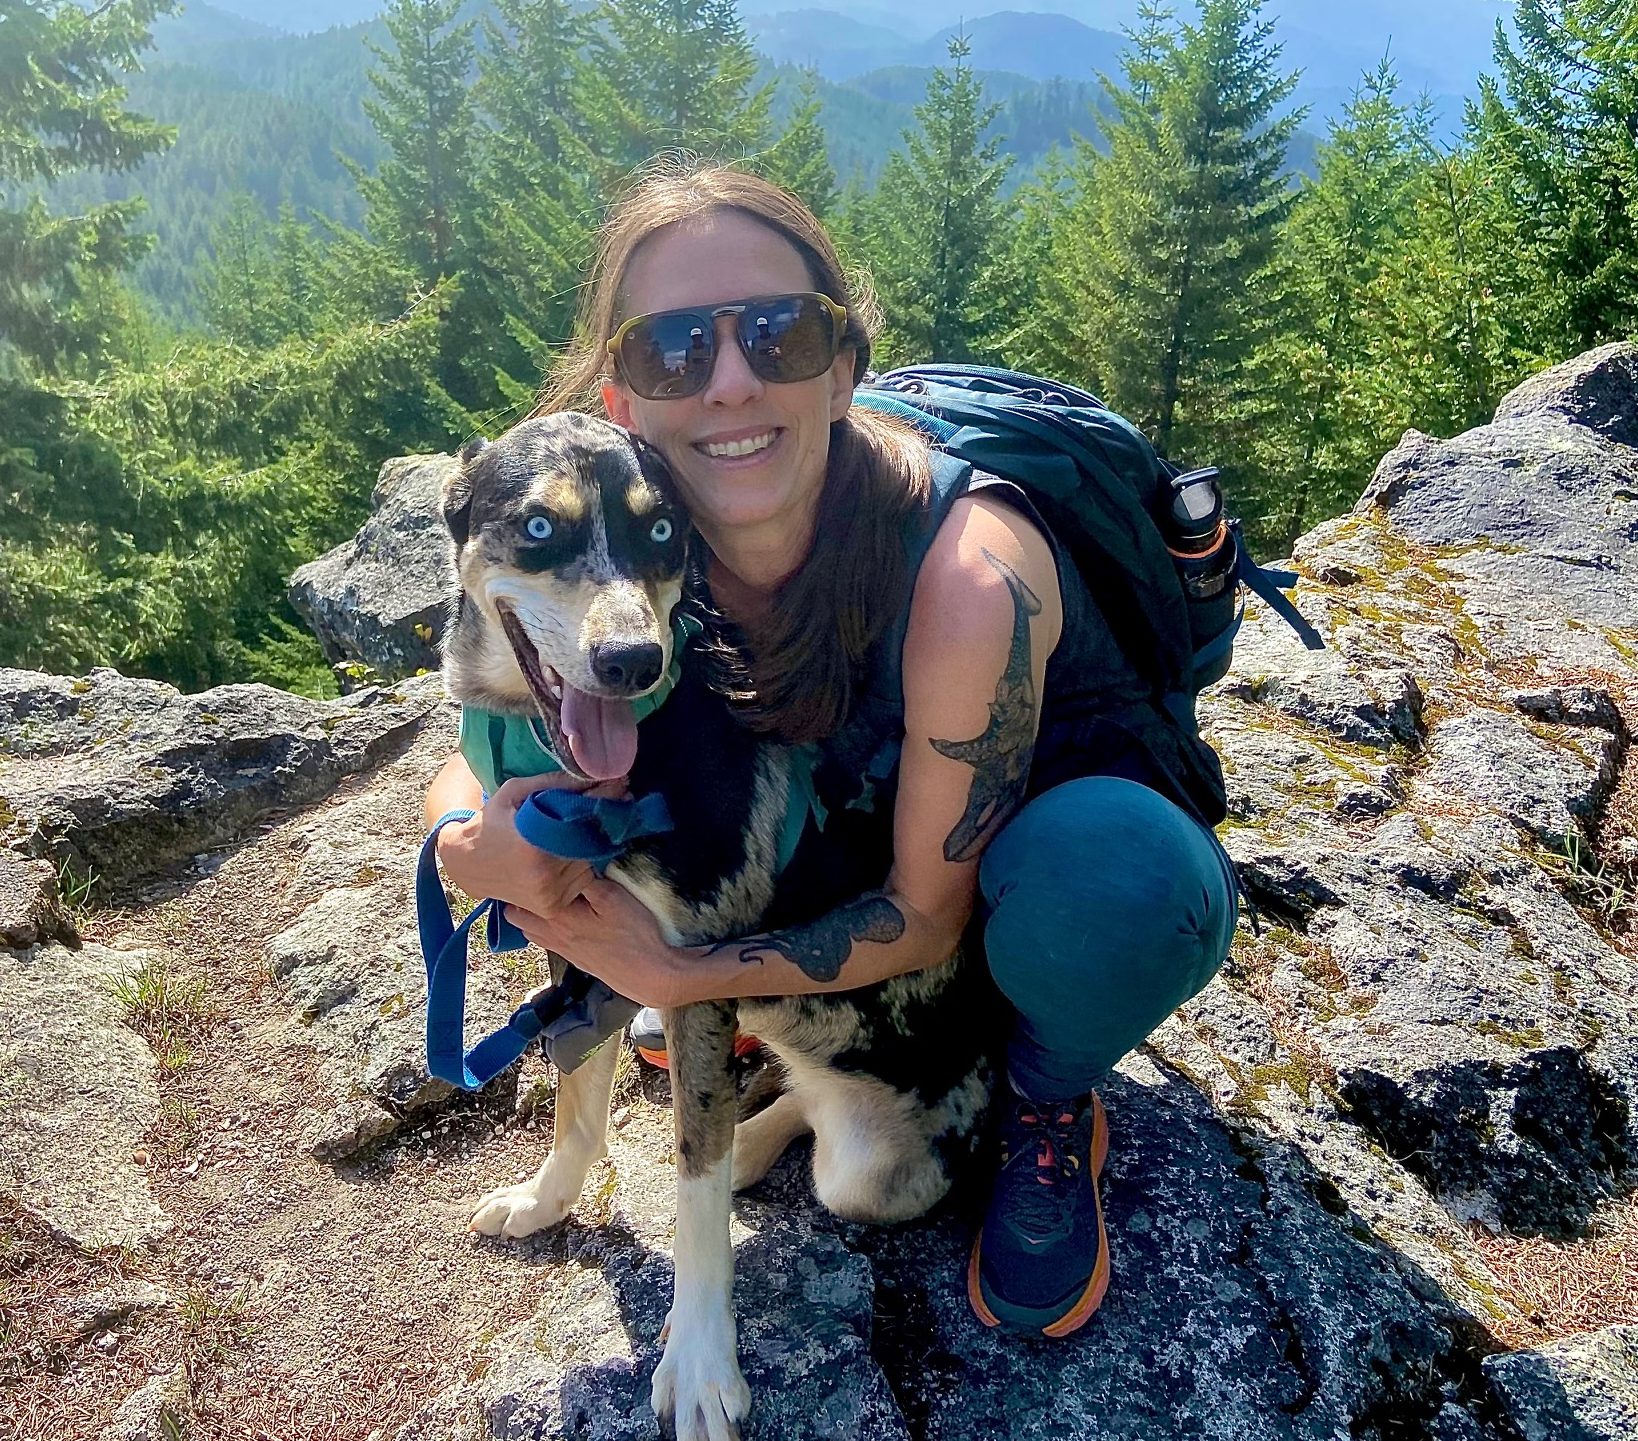 A photo of Taryn wearing sunglasses and a backpack. She is crouched down hugging her dog, Piper, who is a mixed breed. You can see trees and mountain in the background.